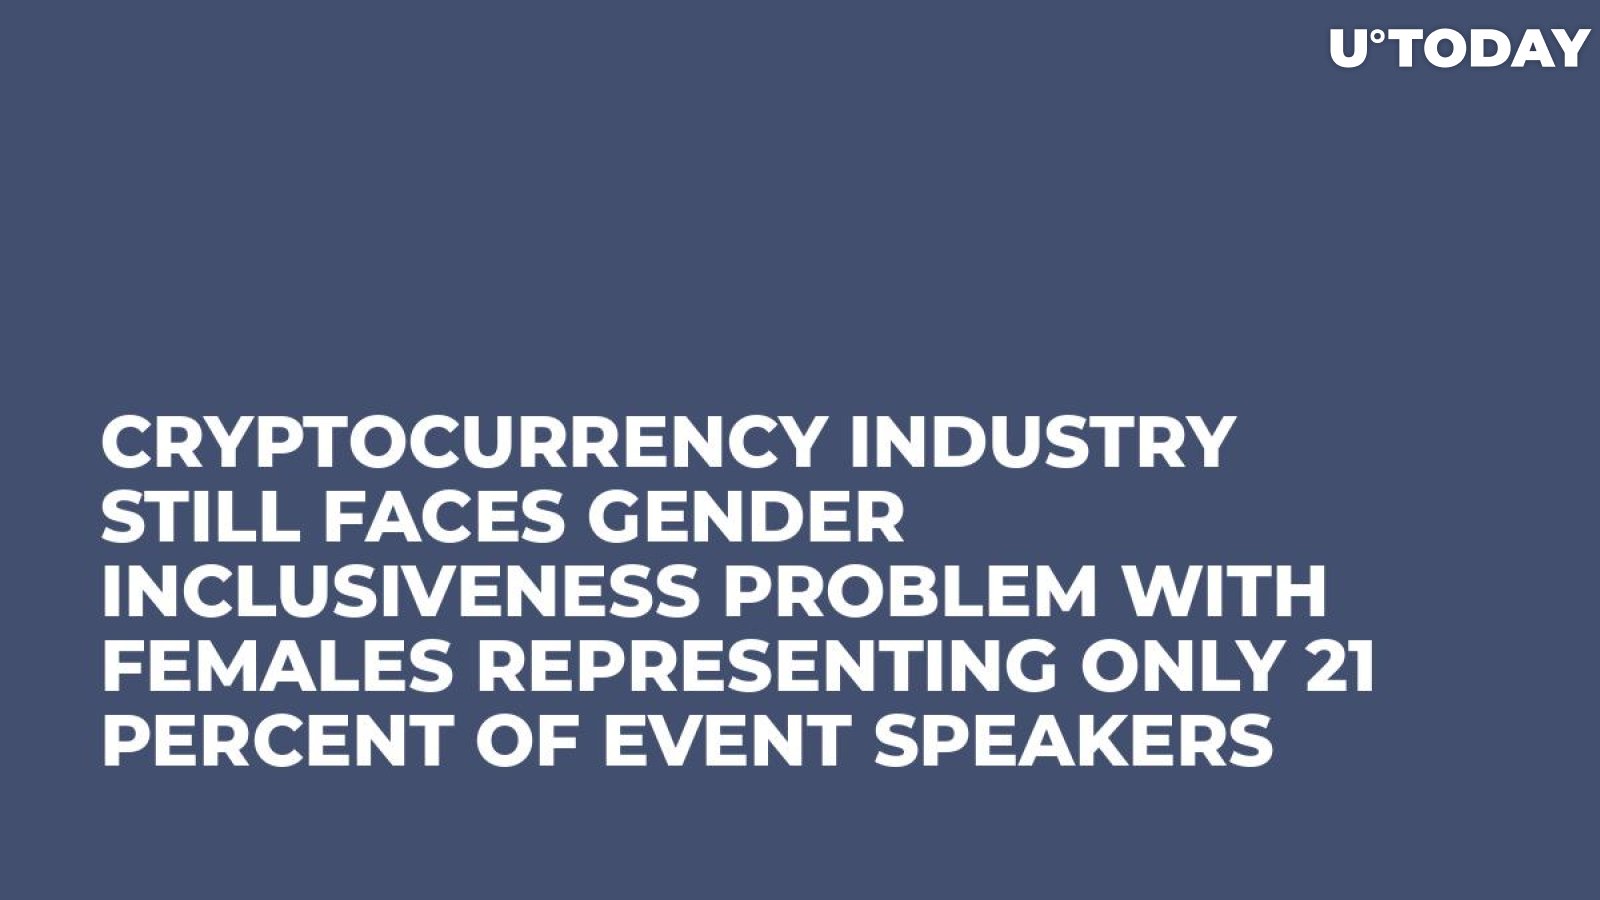 Cryptocurrency Industry Still Faces Gender Inclusiveness Problem With Females Representing Only 21 Percent of Event Speakers